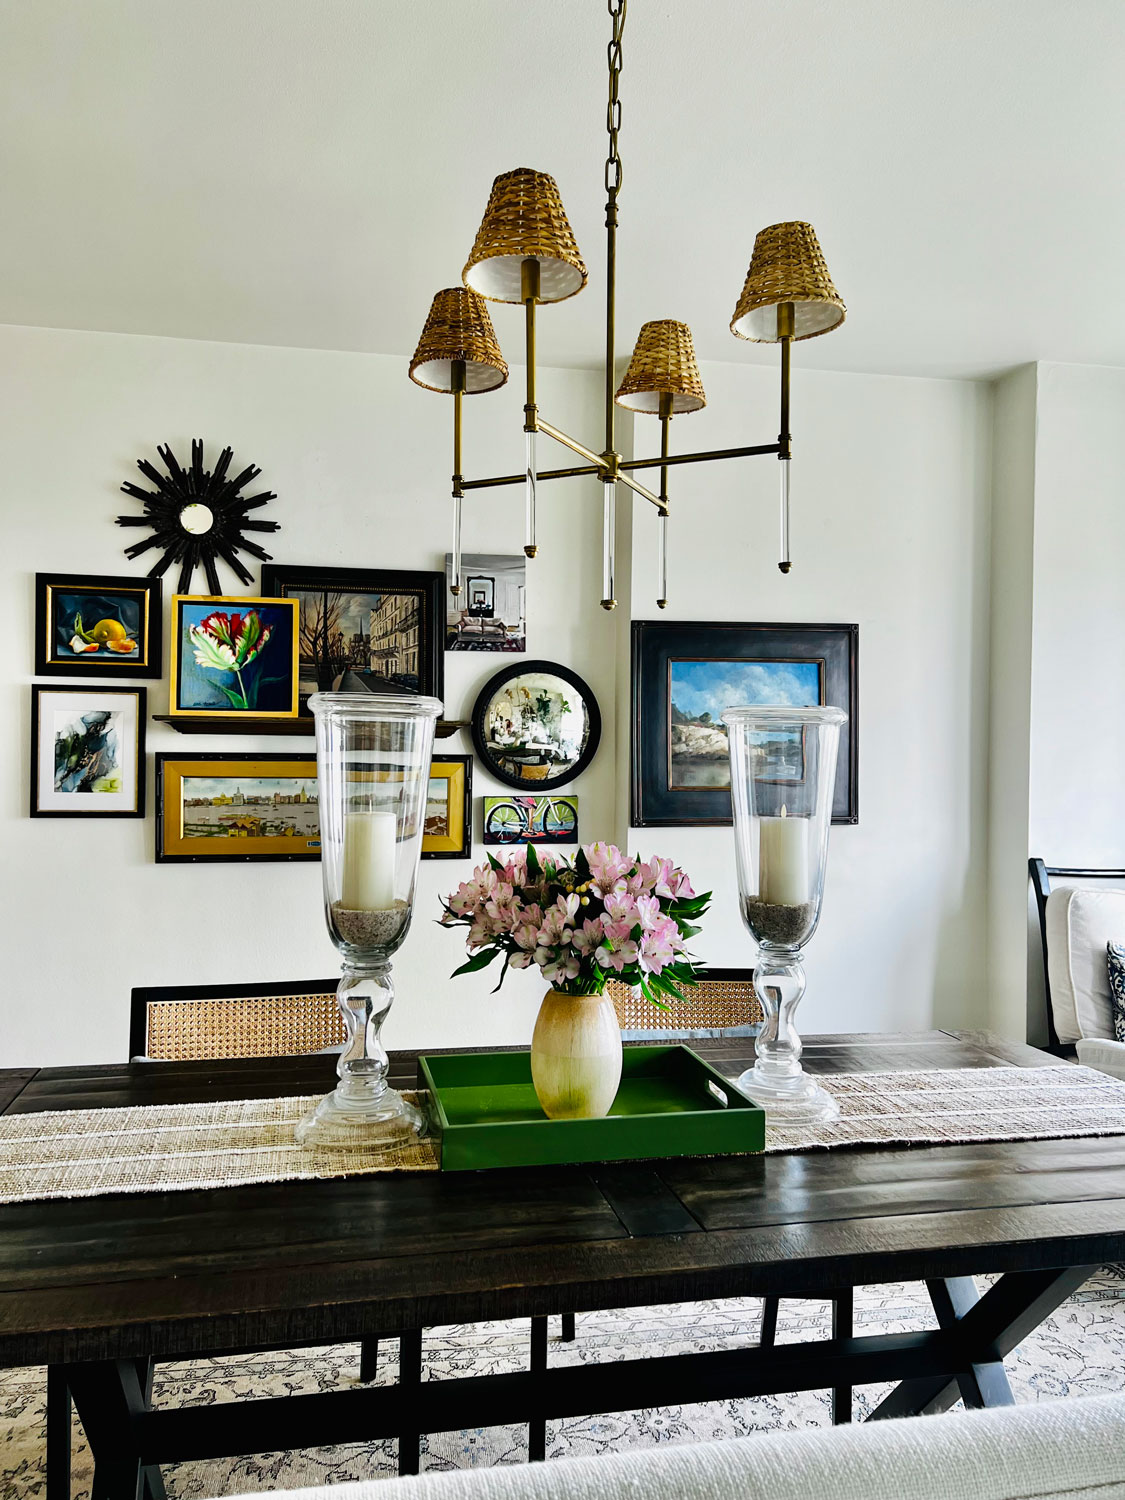 Mary Ann Pickett's dining room with gallery wall